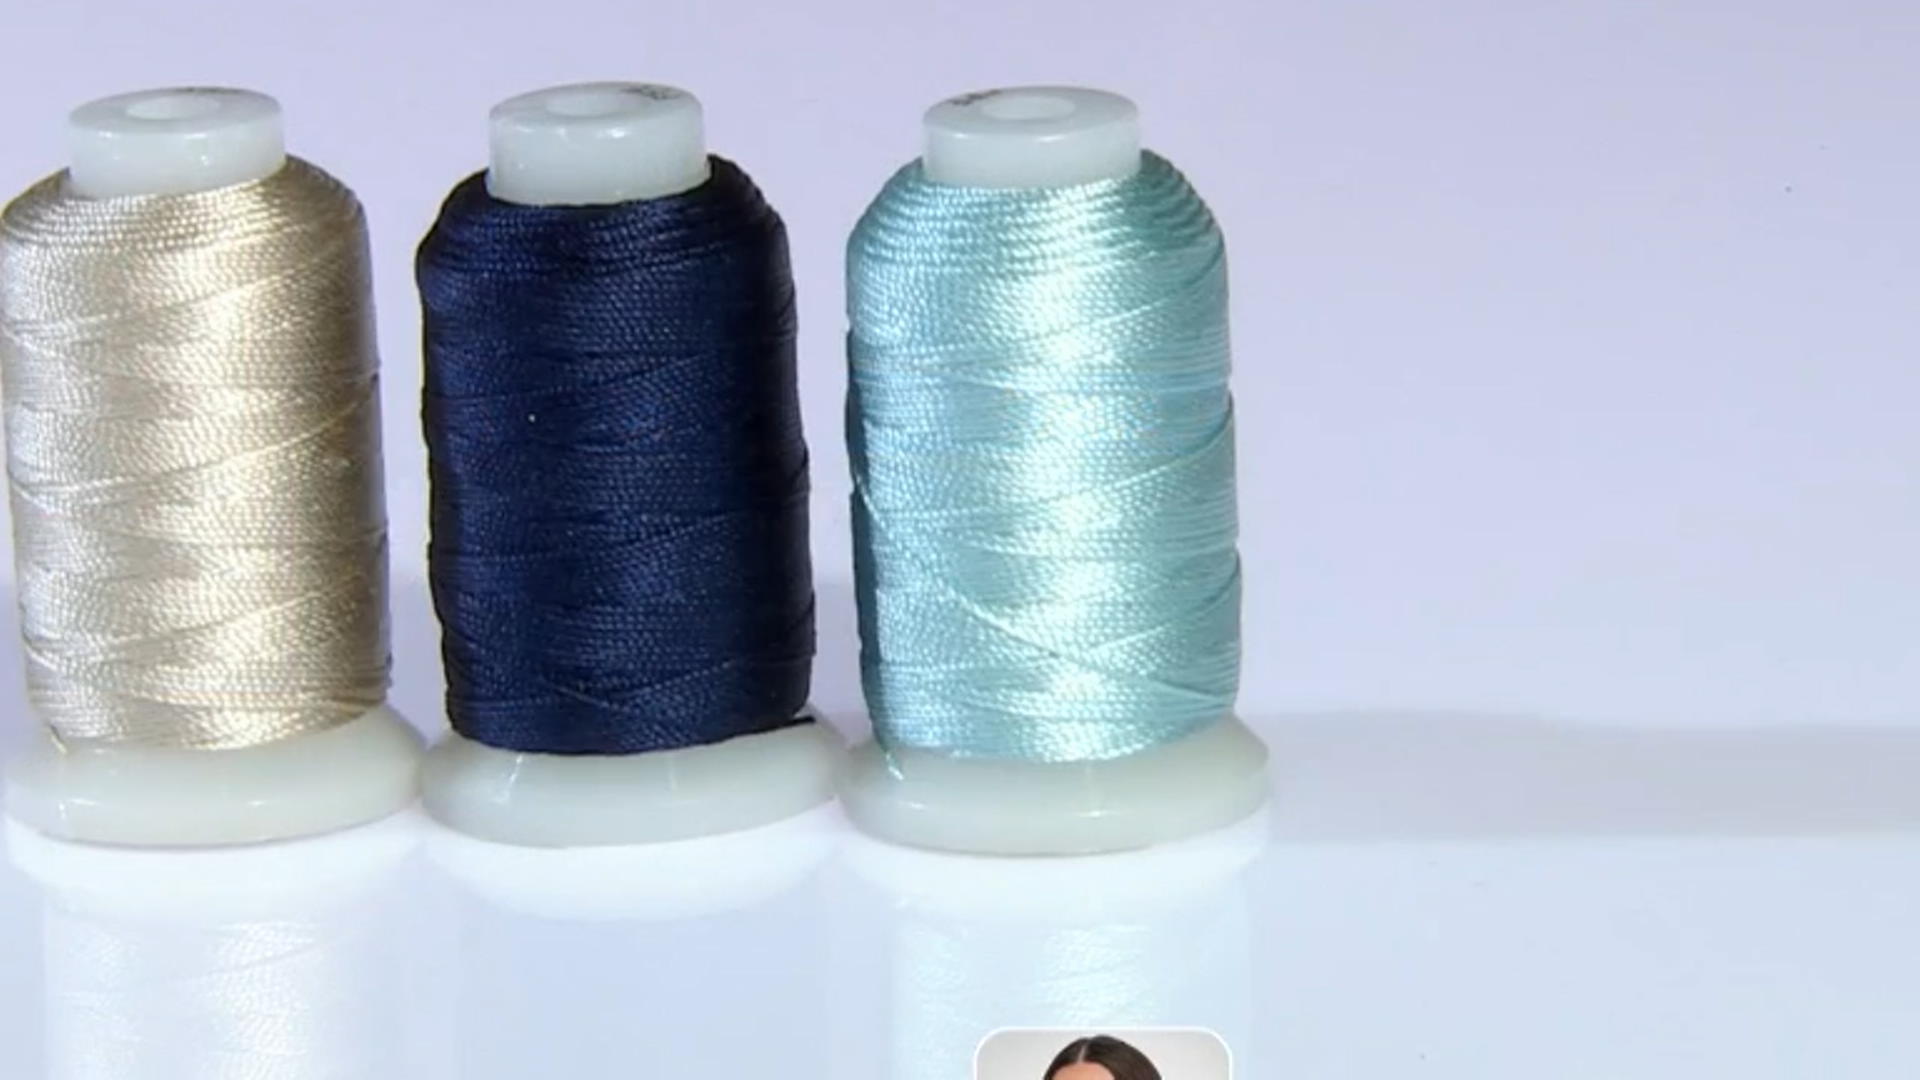 Silk in Size FFF 1/2oz Spool Set of 3 in Ecru, Navy, and Turquoise Appx 276 Yards Total Video Thumbnail